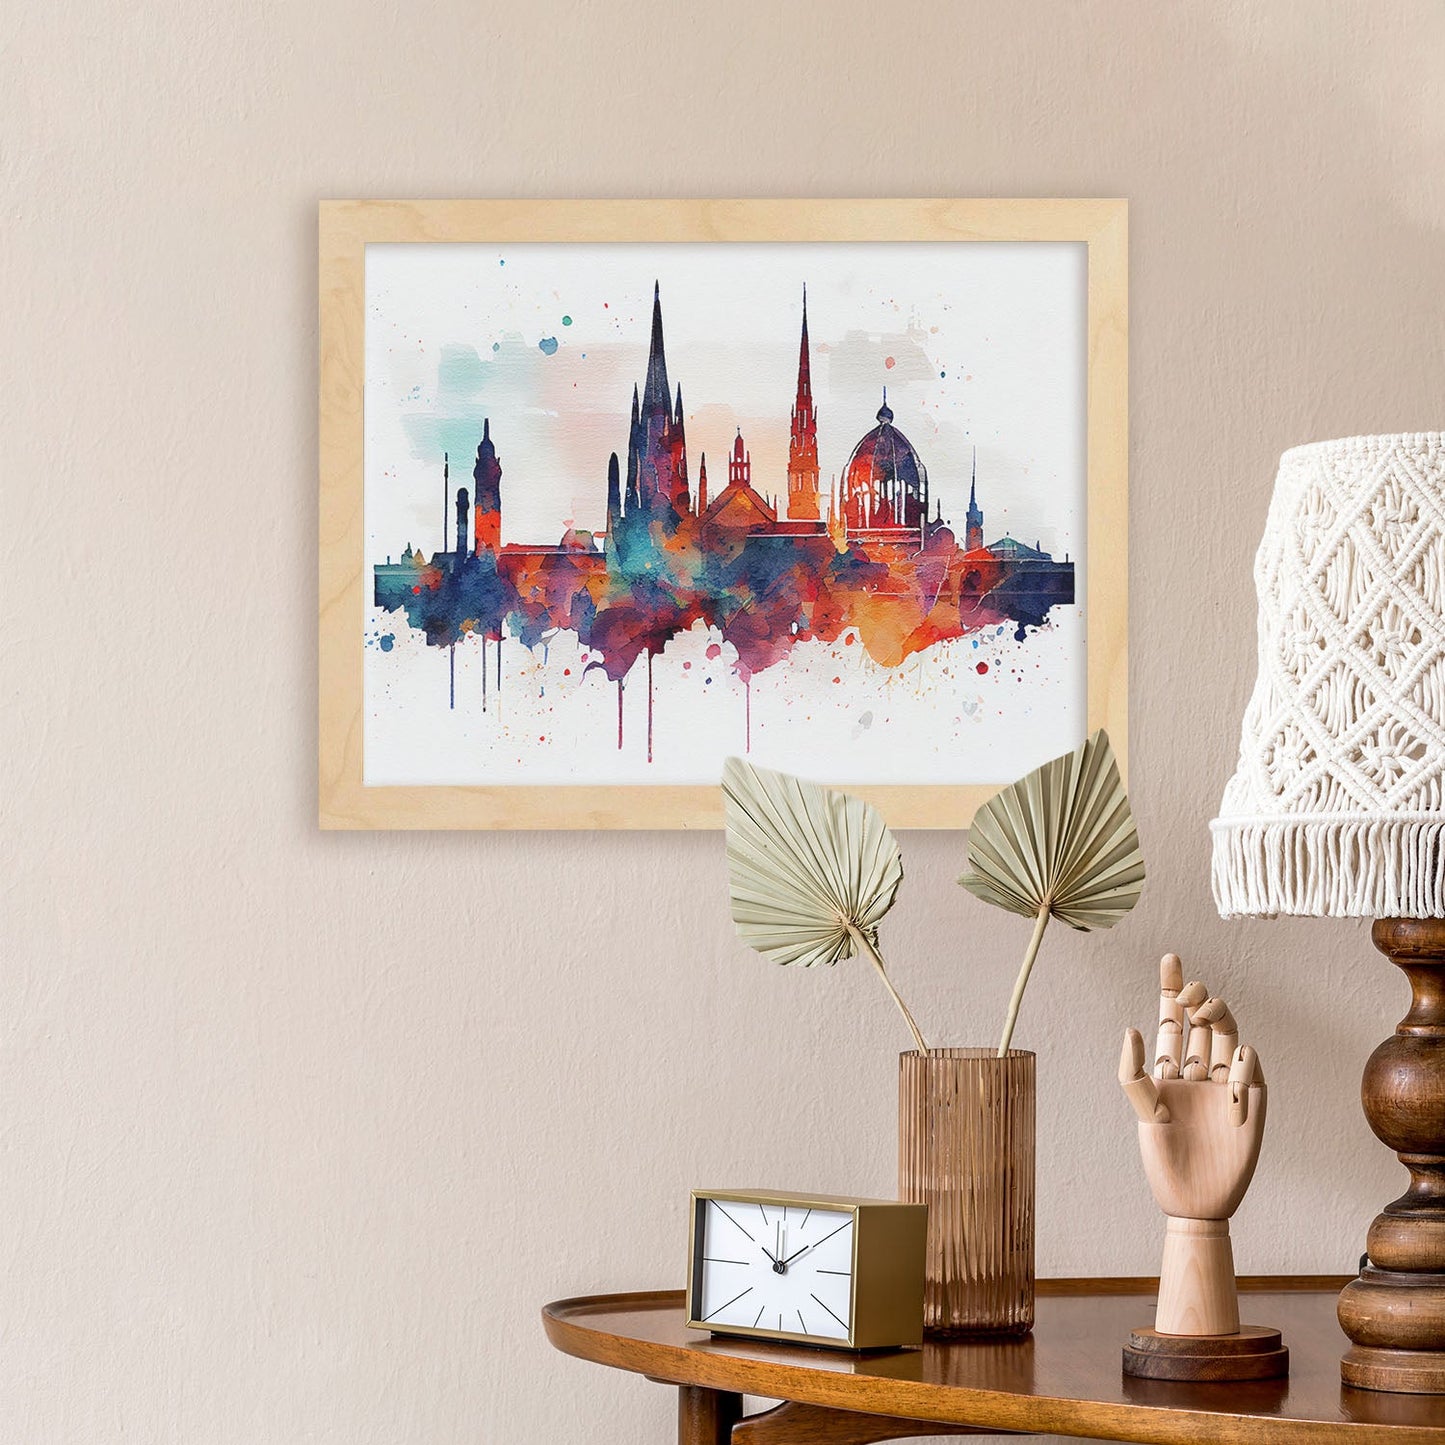 Nacnic watercolor of a skyline of the city of Vienna_2. Aesthetic Wall Art Prints for Bedroom or Living Room Design.